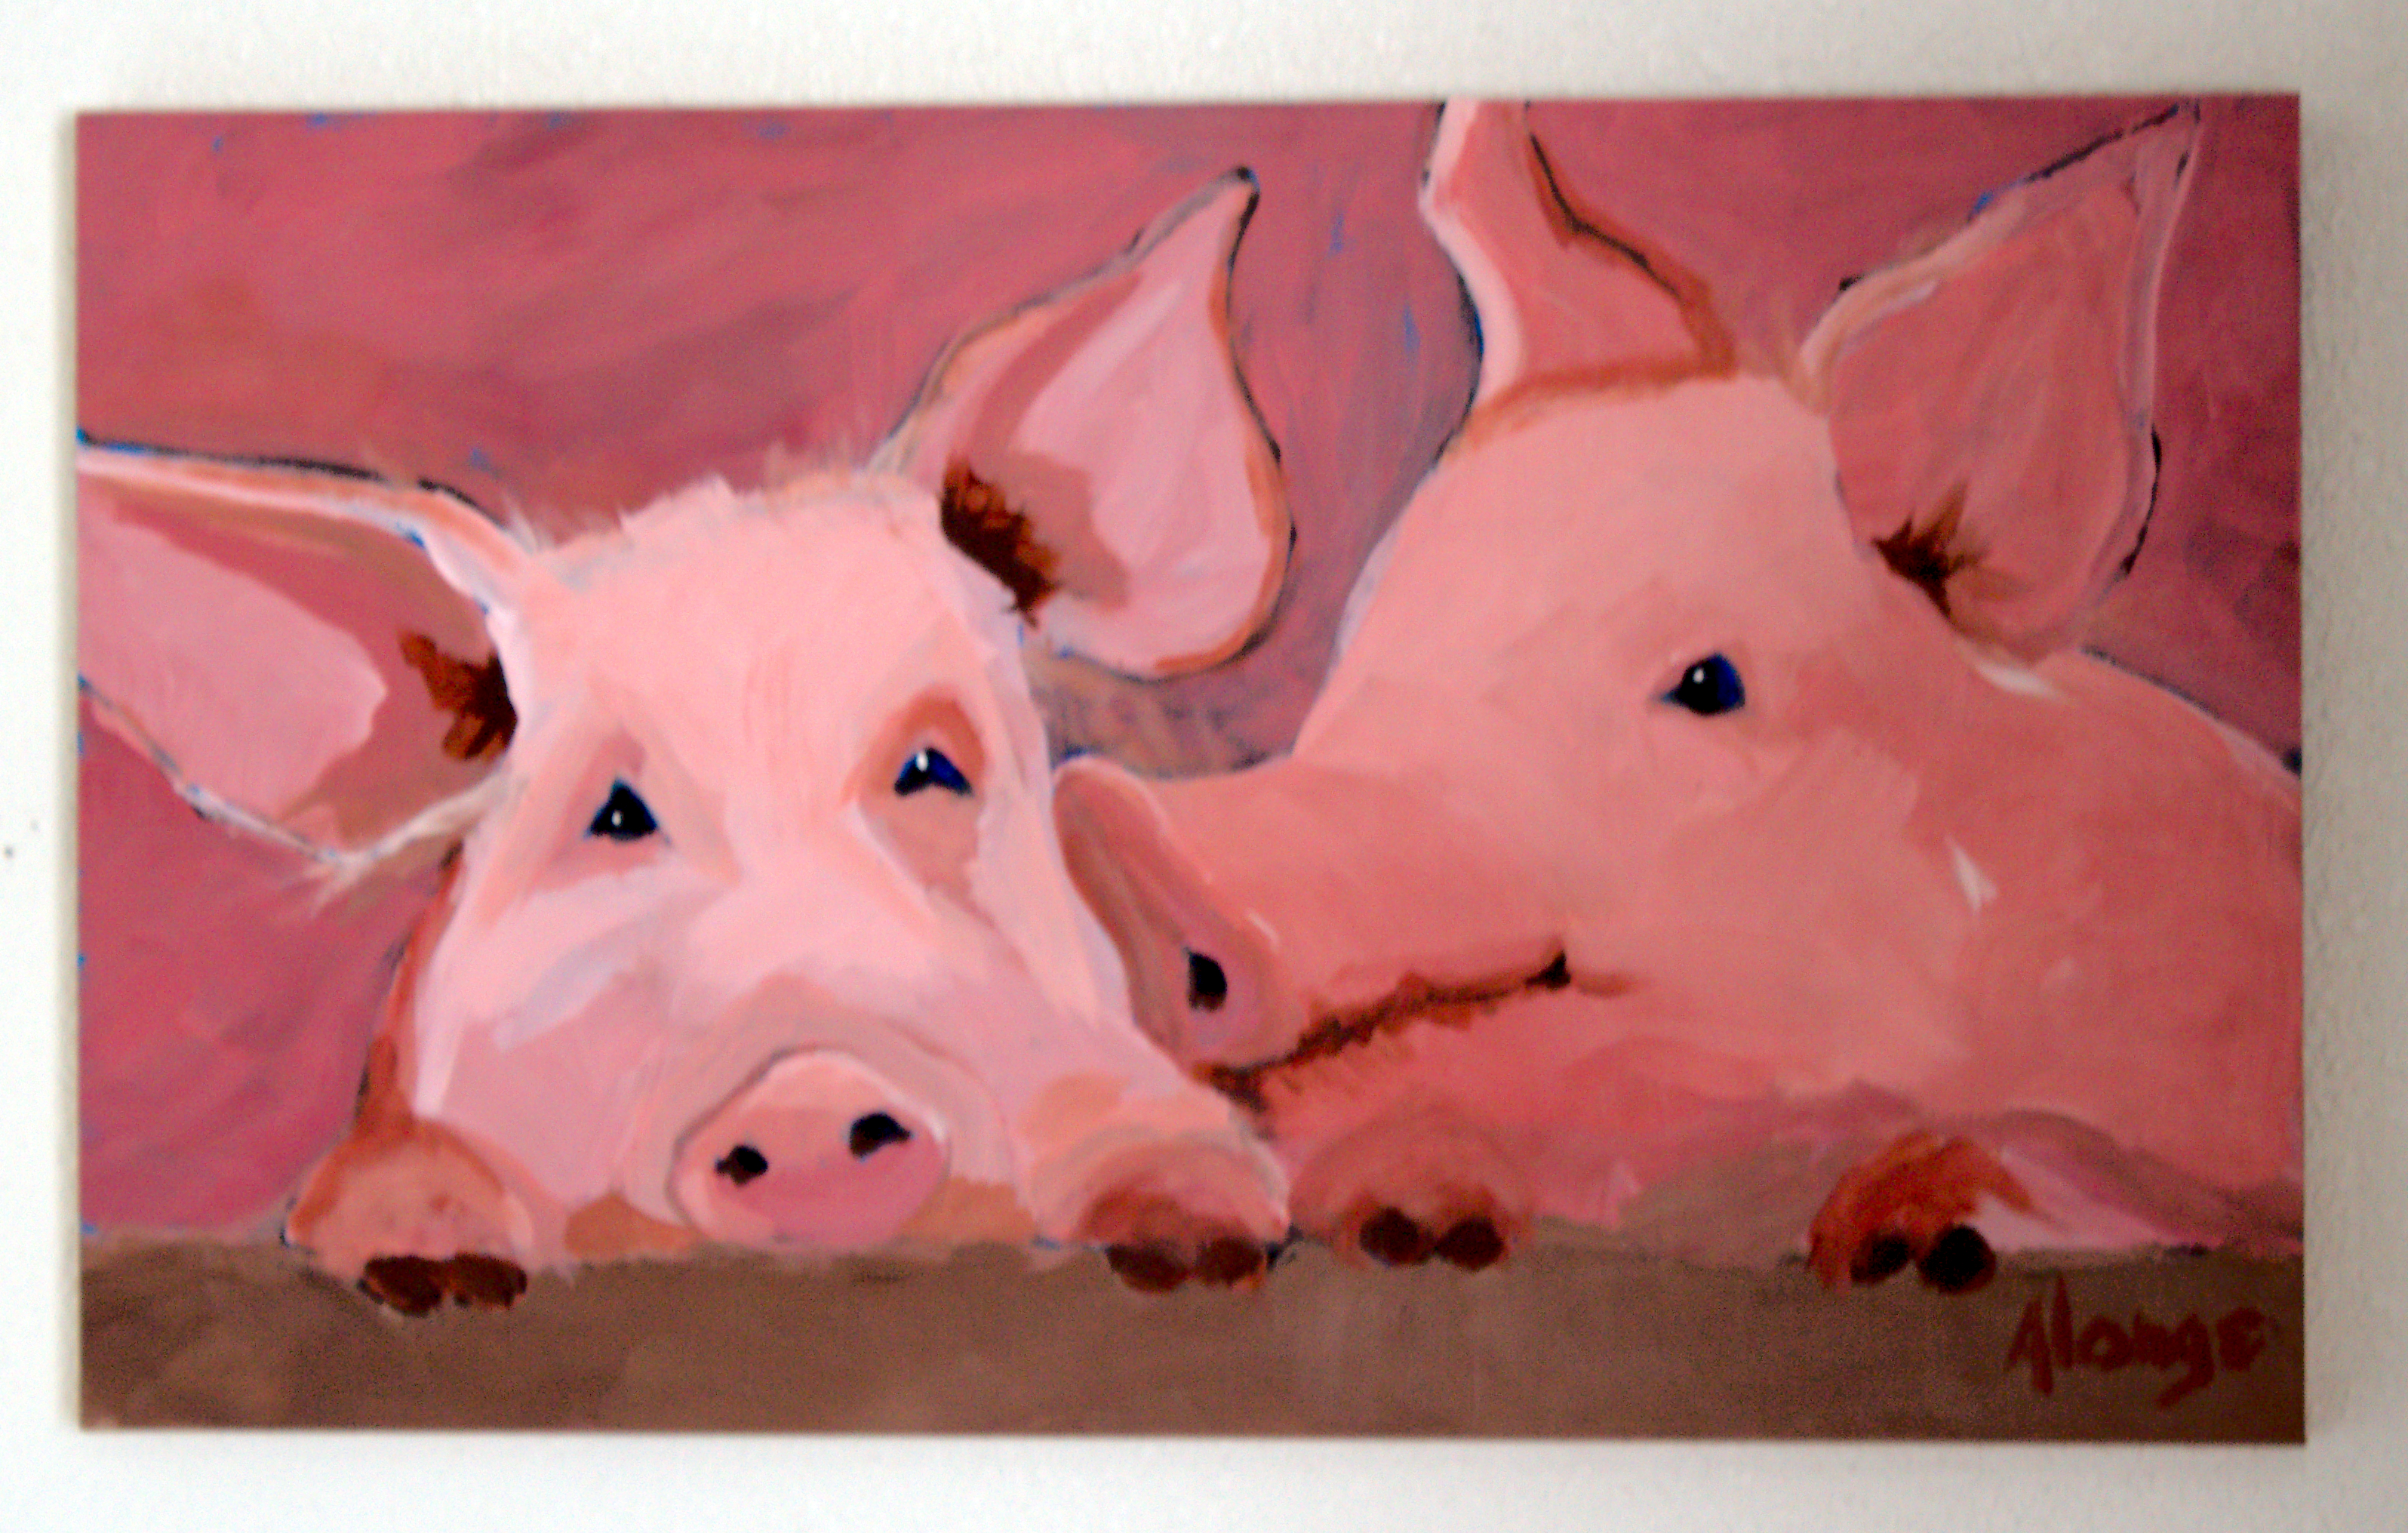 "This little Piggie"
12 x 20 Acrylic on Board